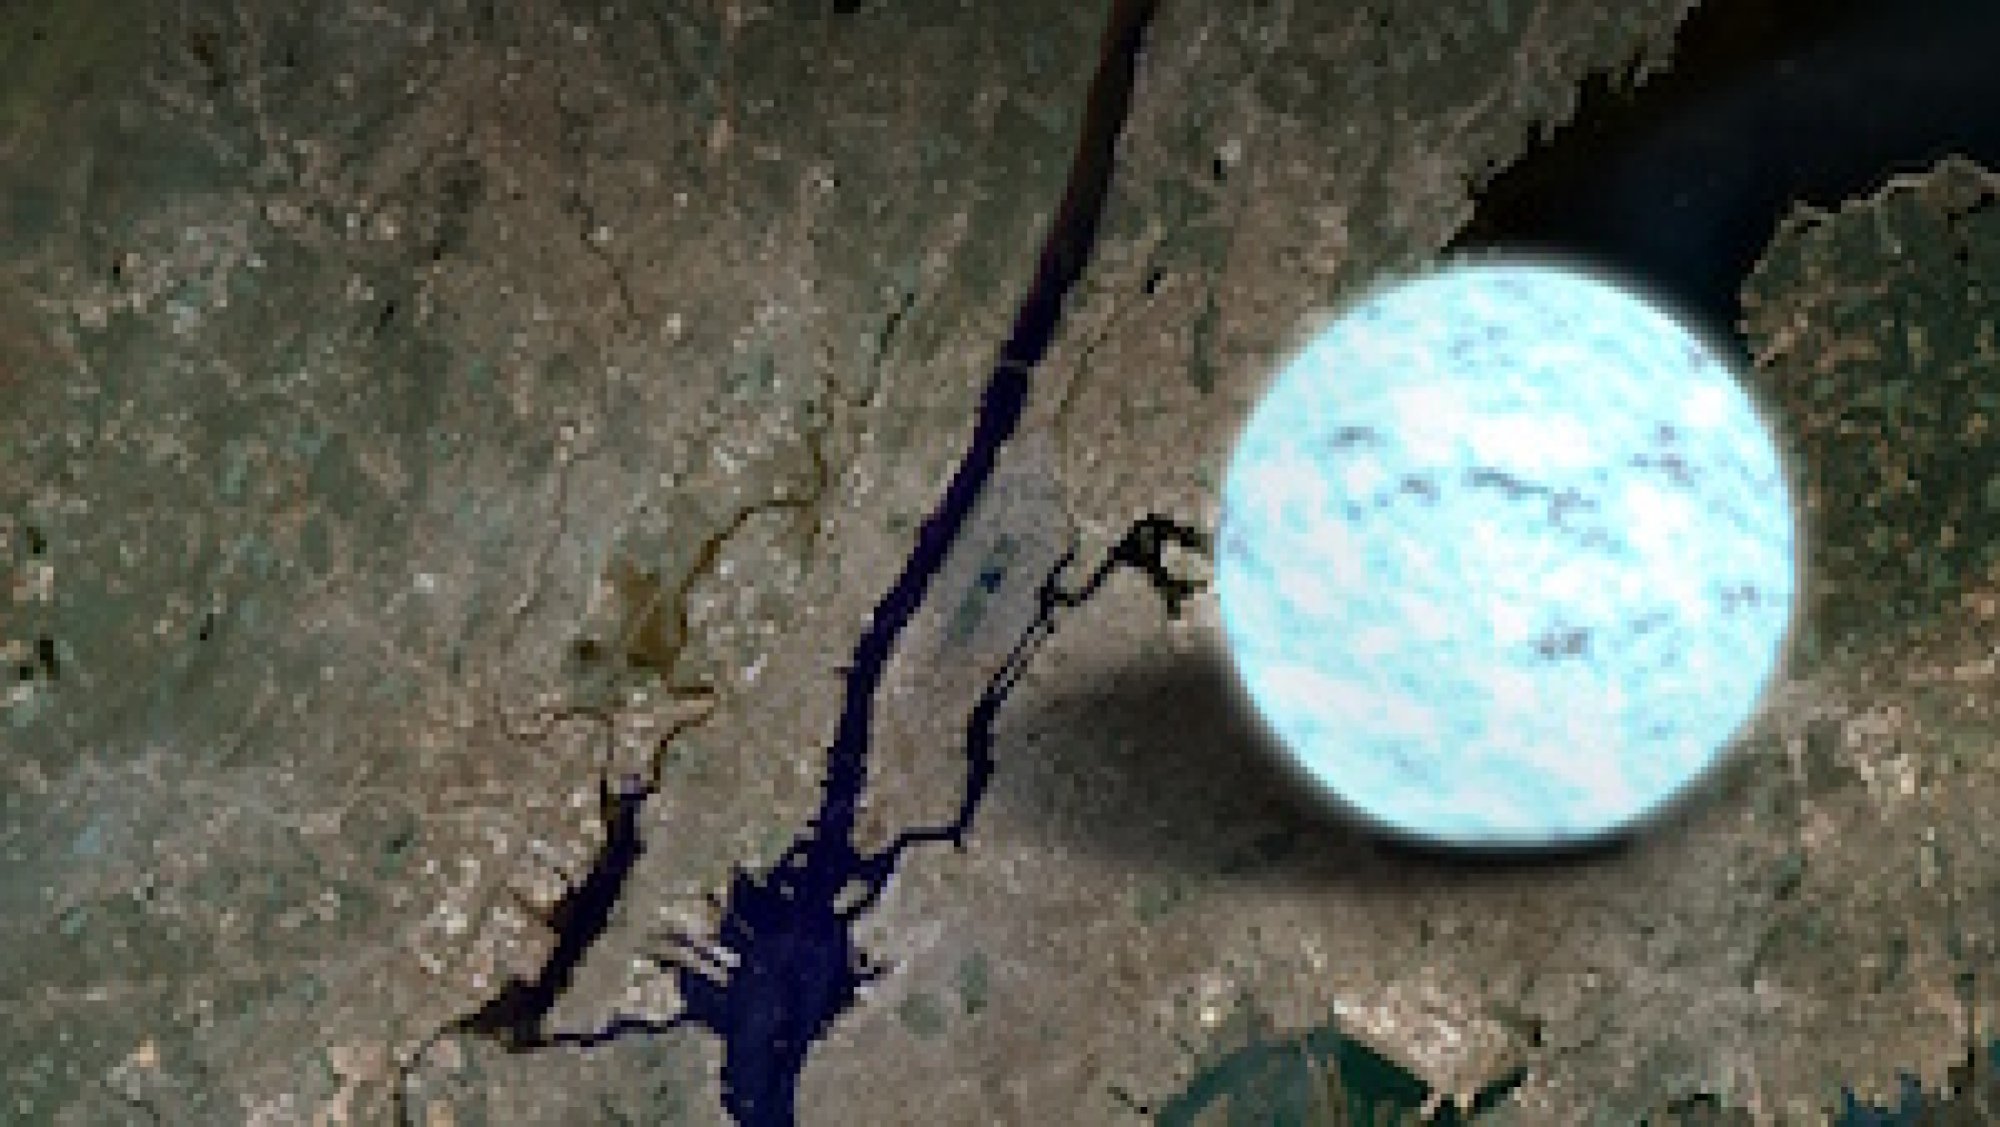 A neutron star compared to Manhattan, New York. These objects are like "crushing half a million times Earth